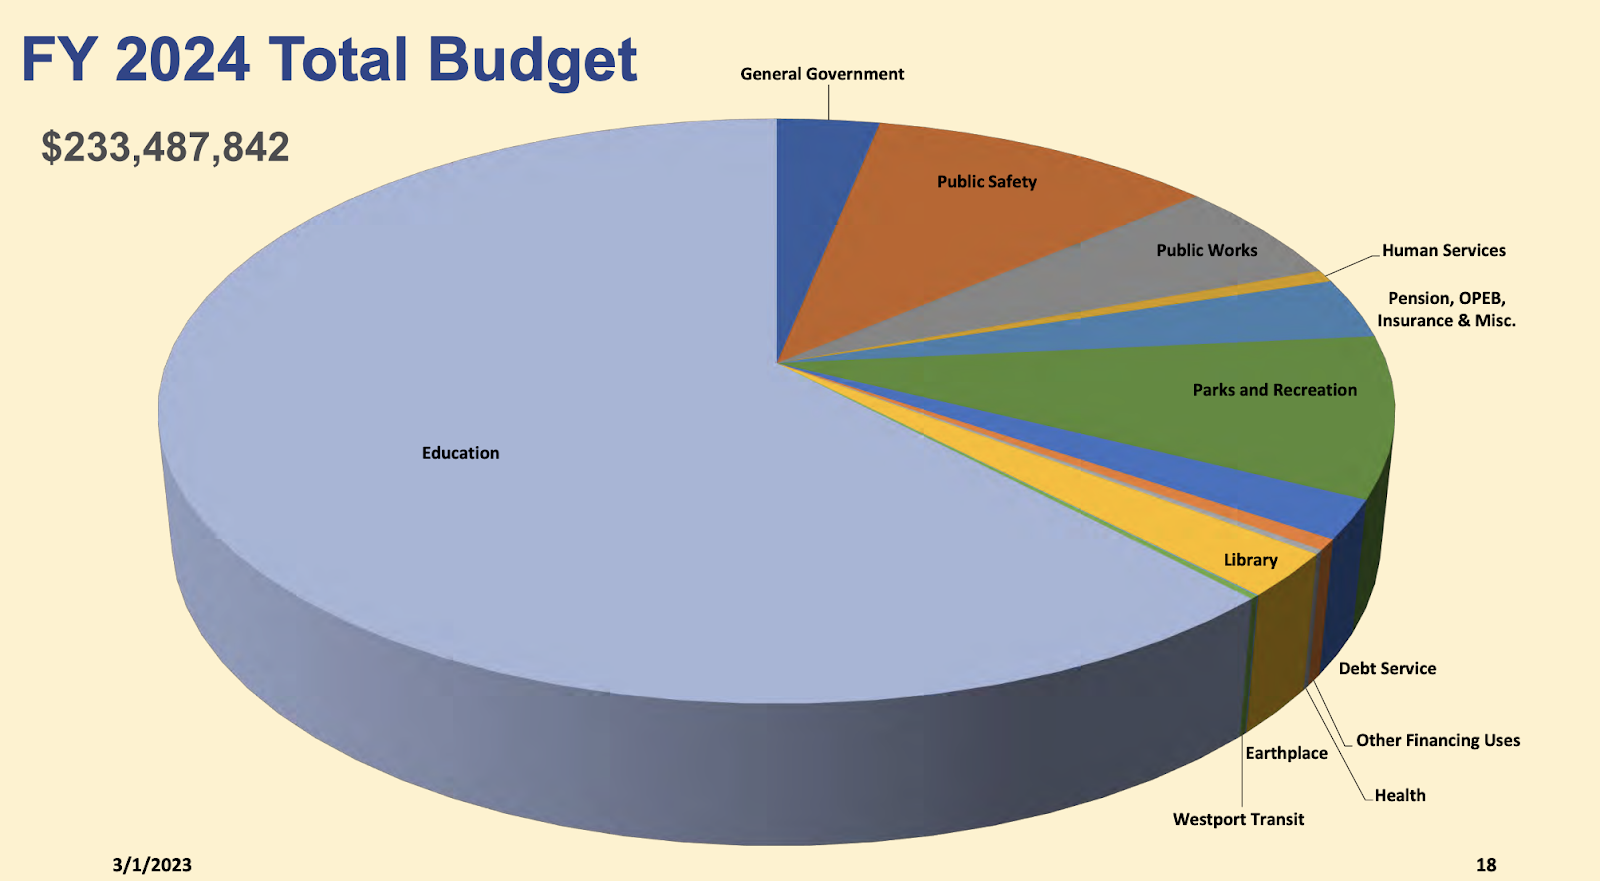 A look at the overall budget